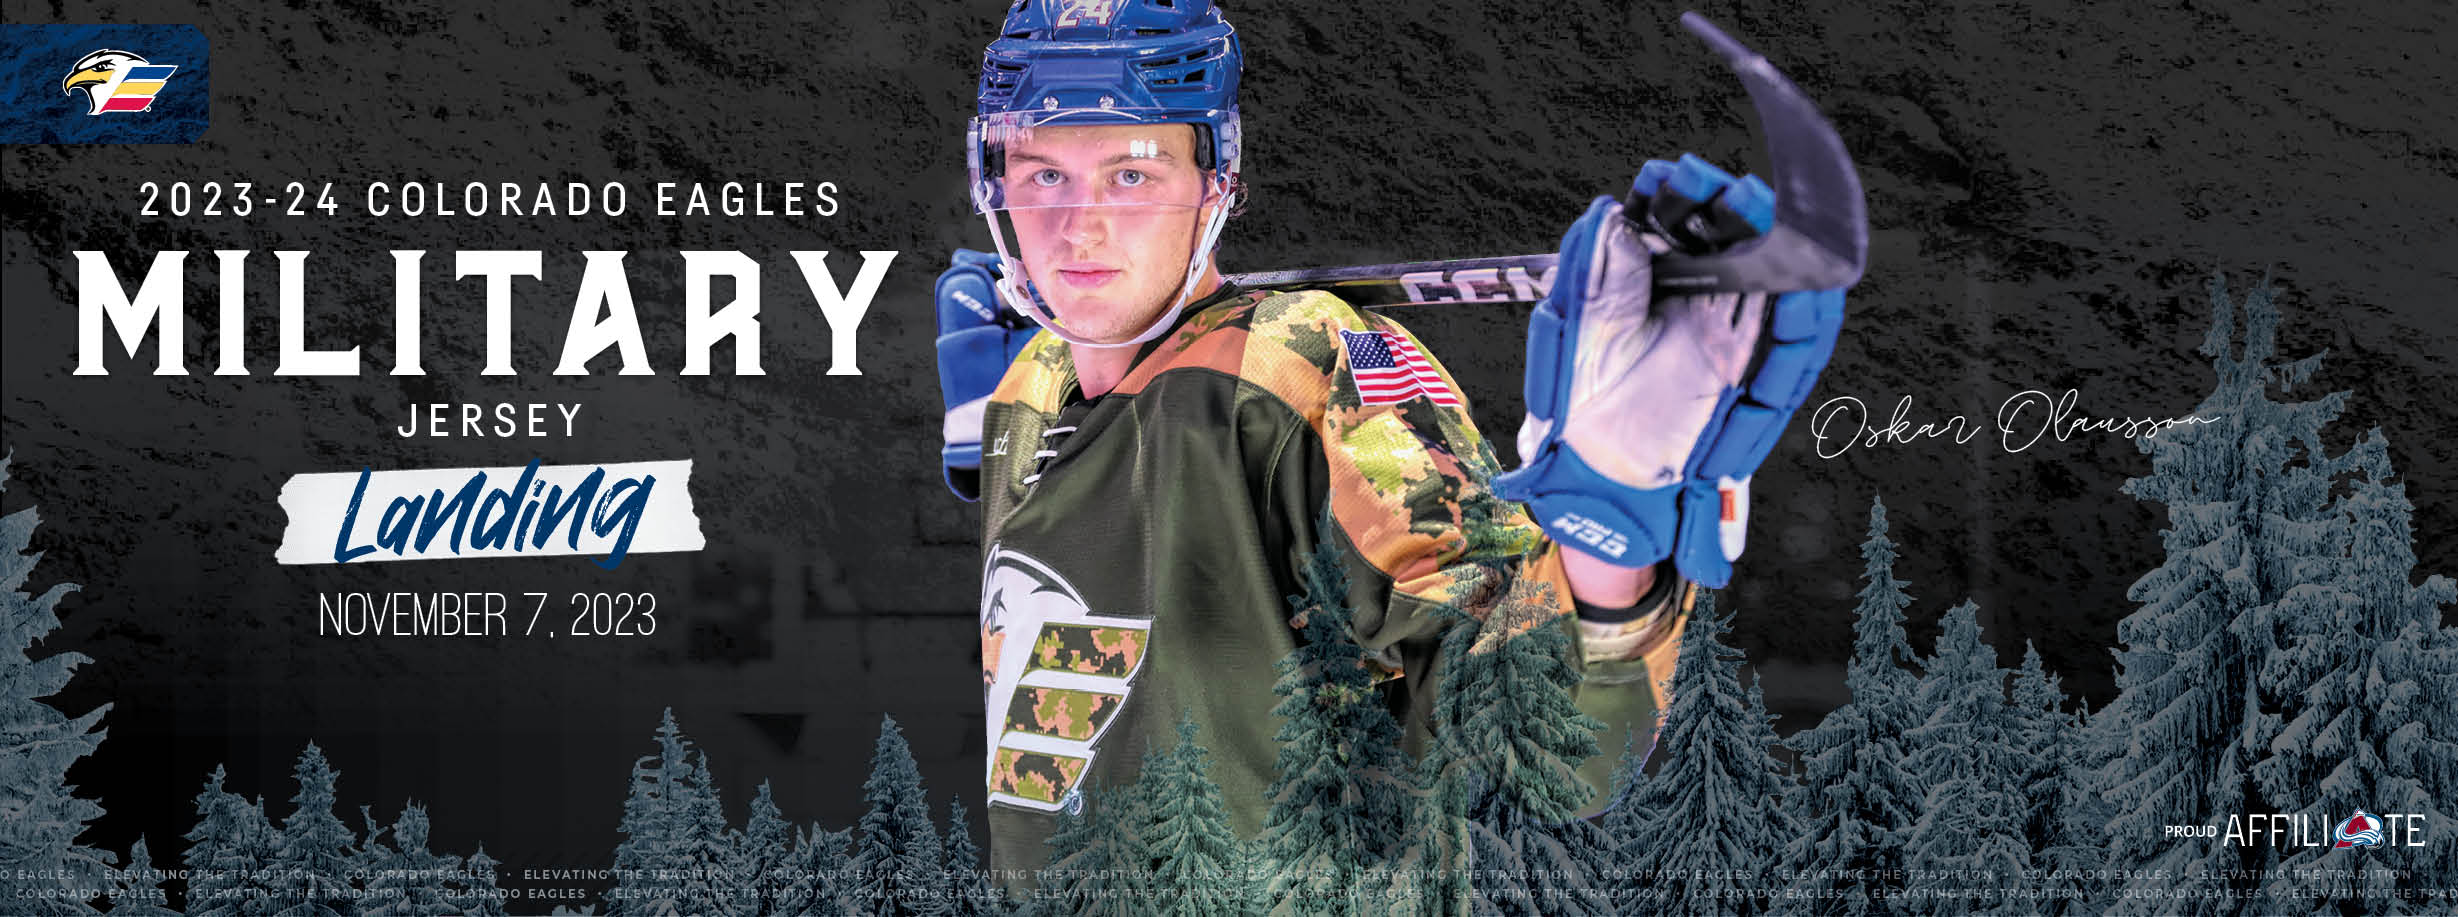 Eagles Announce 2023-24 Military Jersey